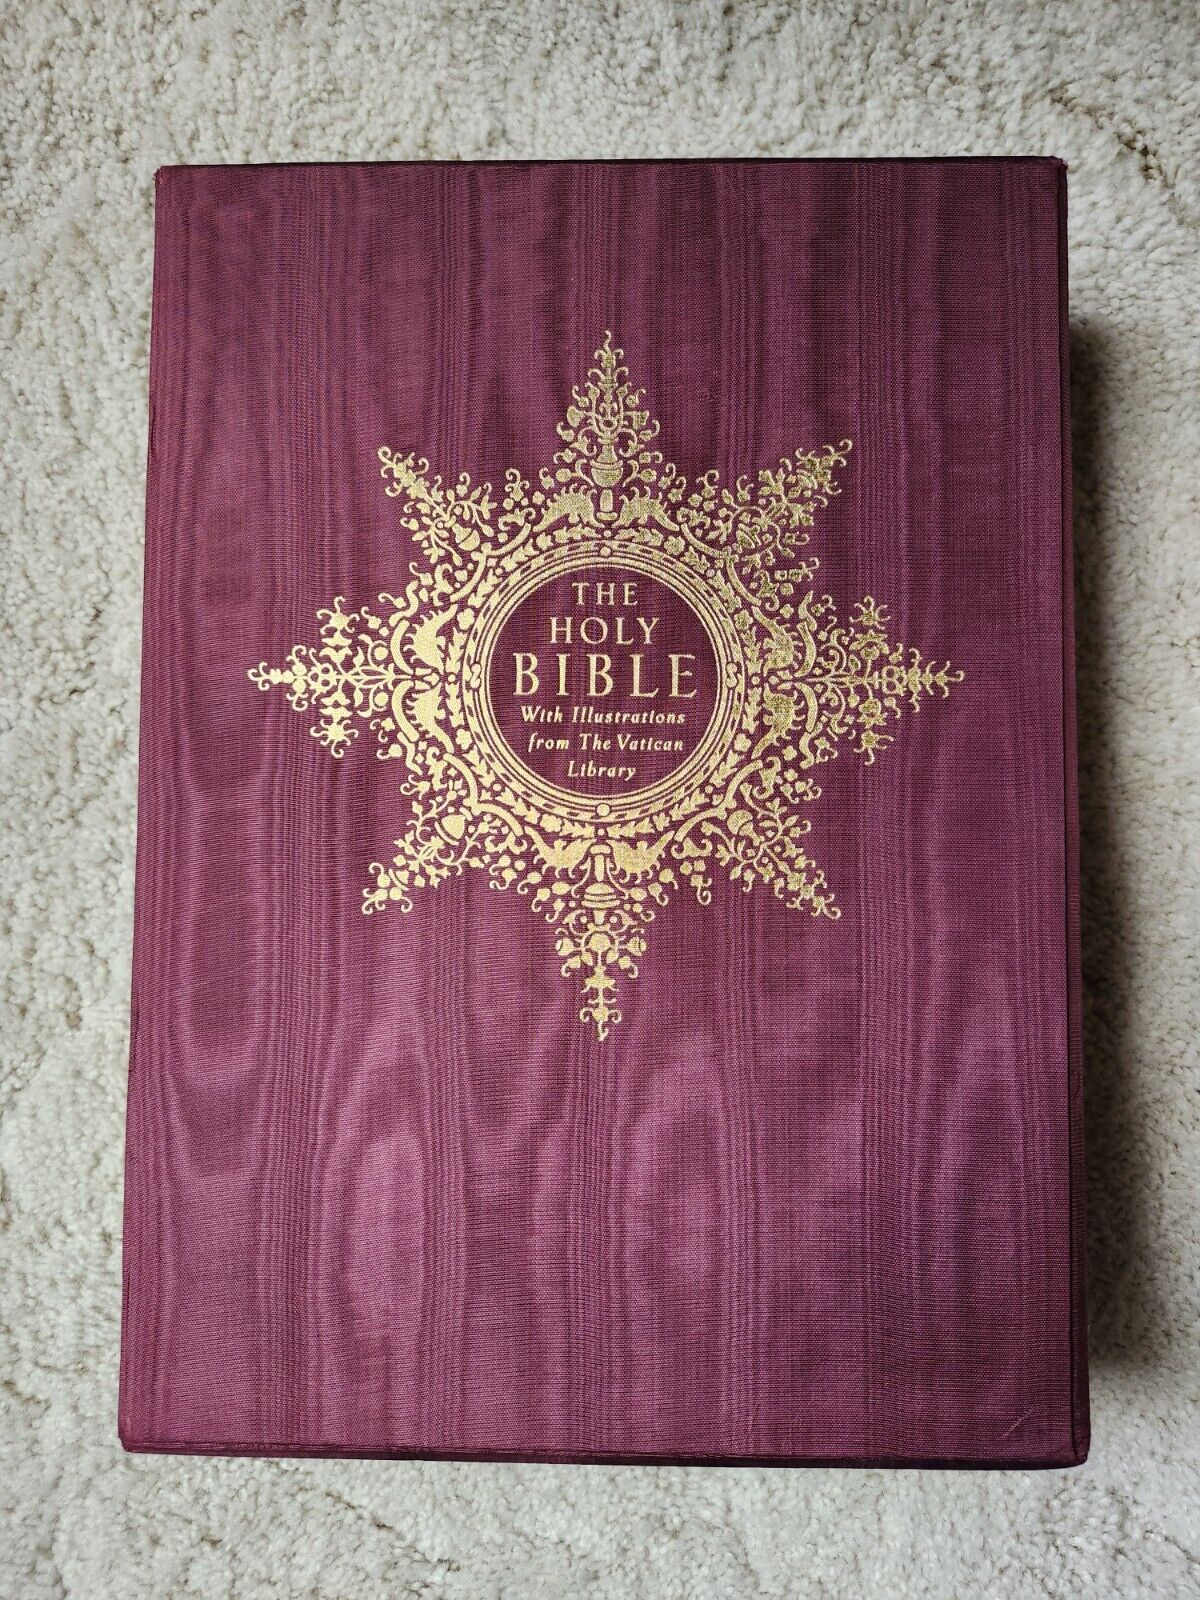 The Holy Bible: With Illustrations from the Vatican Library: 1995  (1st Edition)